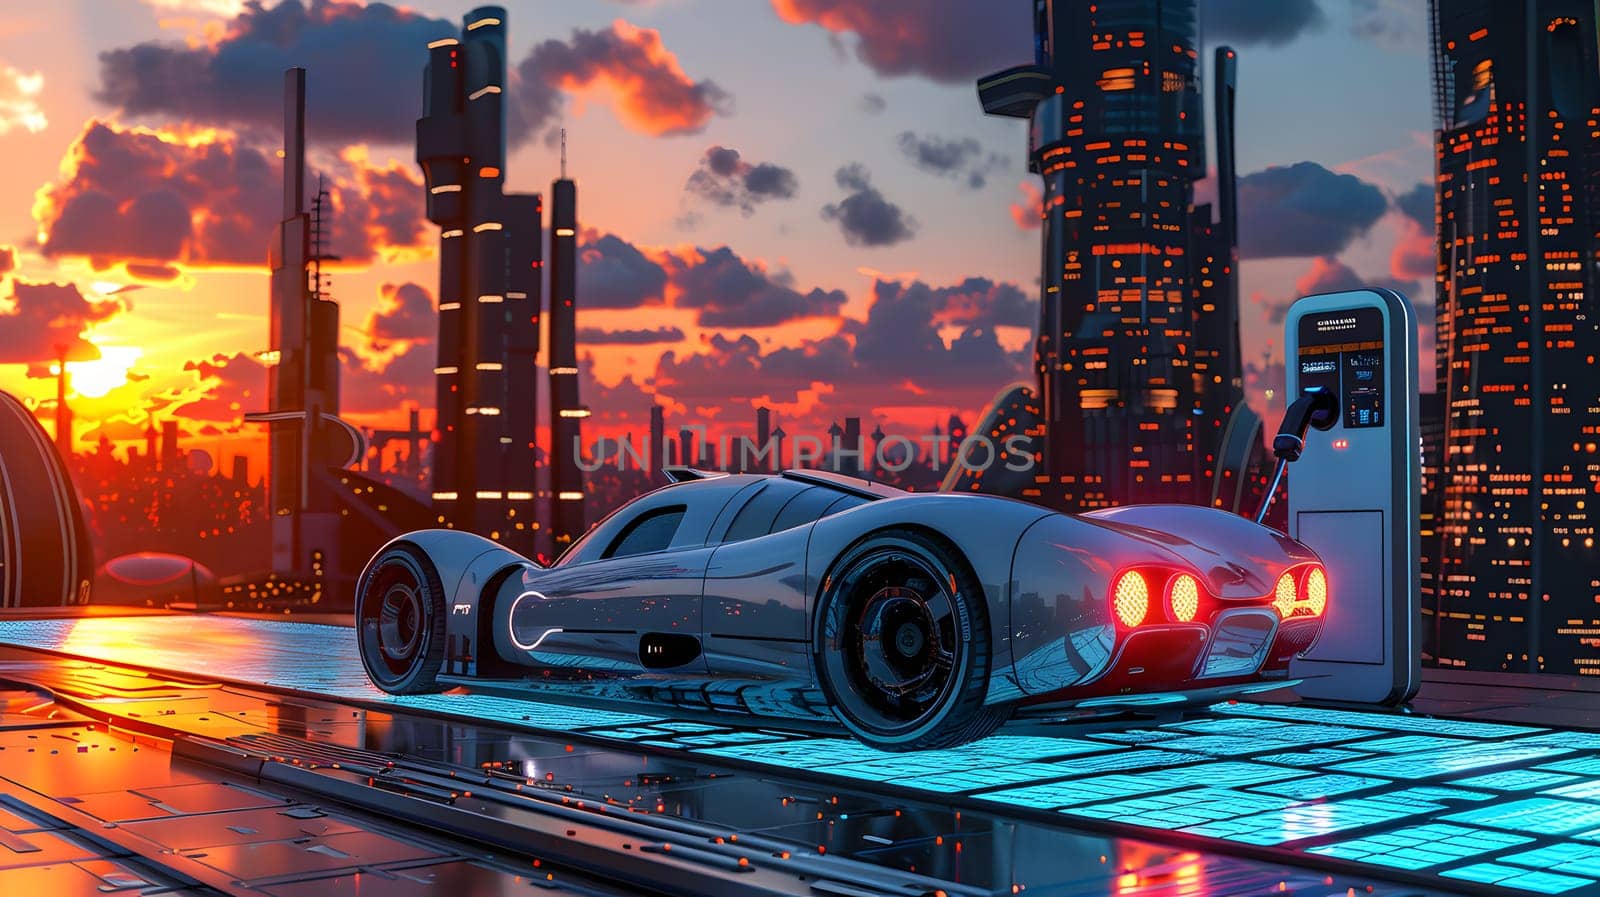 The vehicles wheels glide on the futuristic city streets as the car cruises through the sunset, with automotive lighting illuminating the path ahead